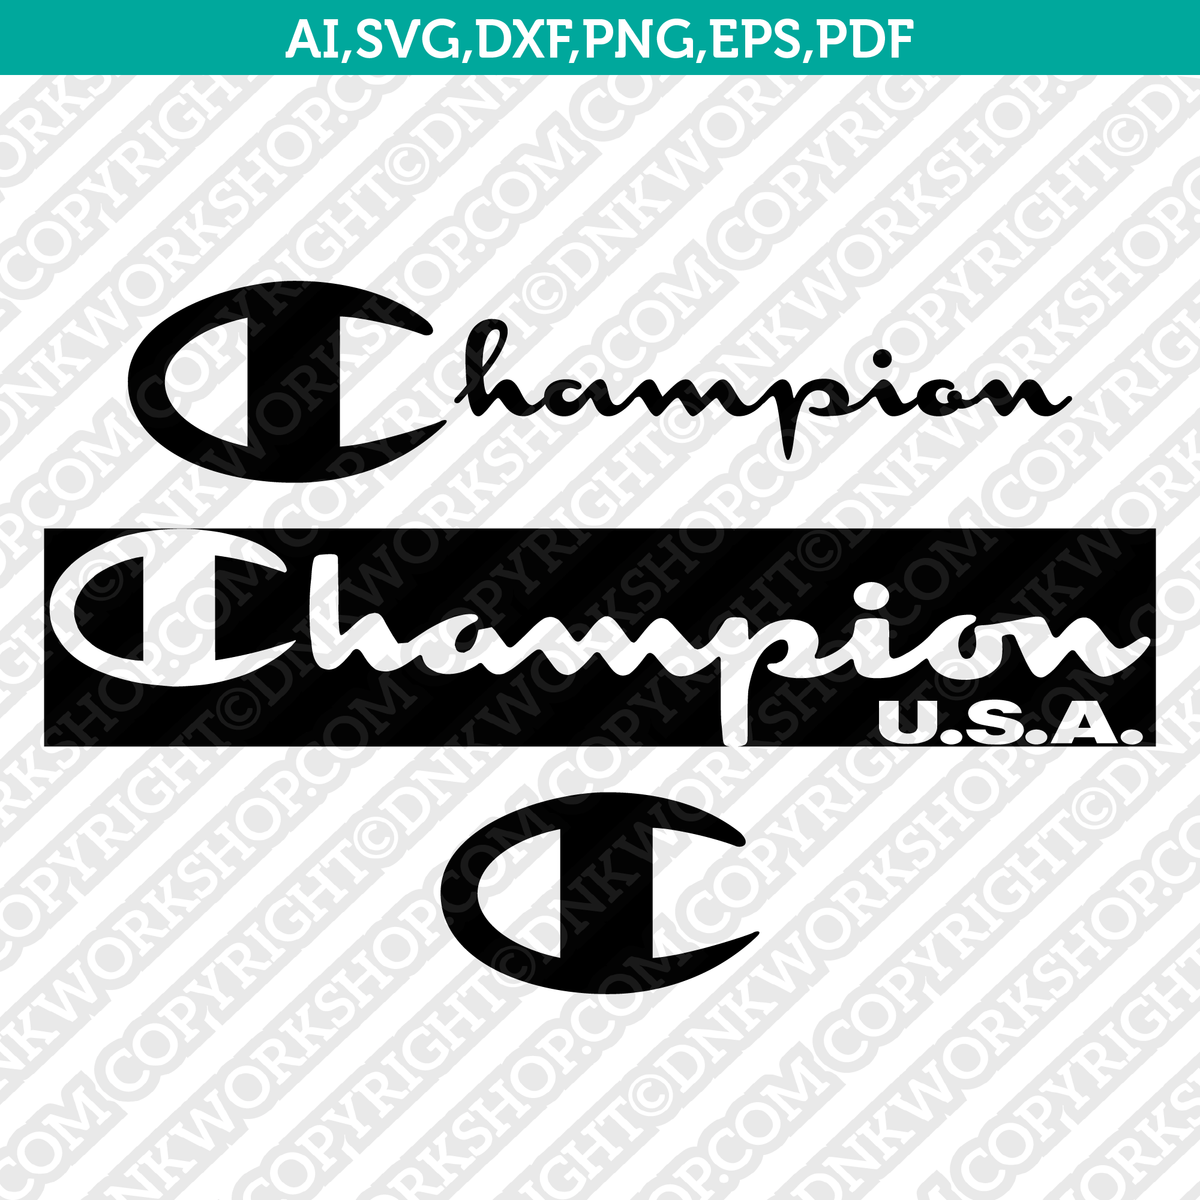 Champion logo in vector (.EPS + .SVG + .CDR) for free download